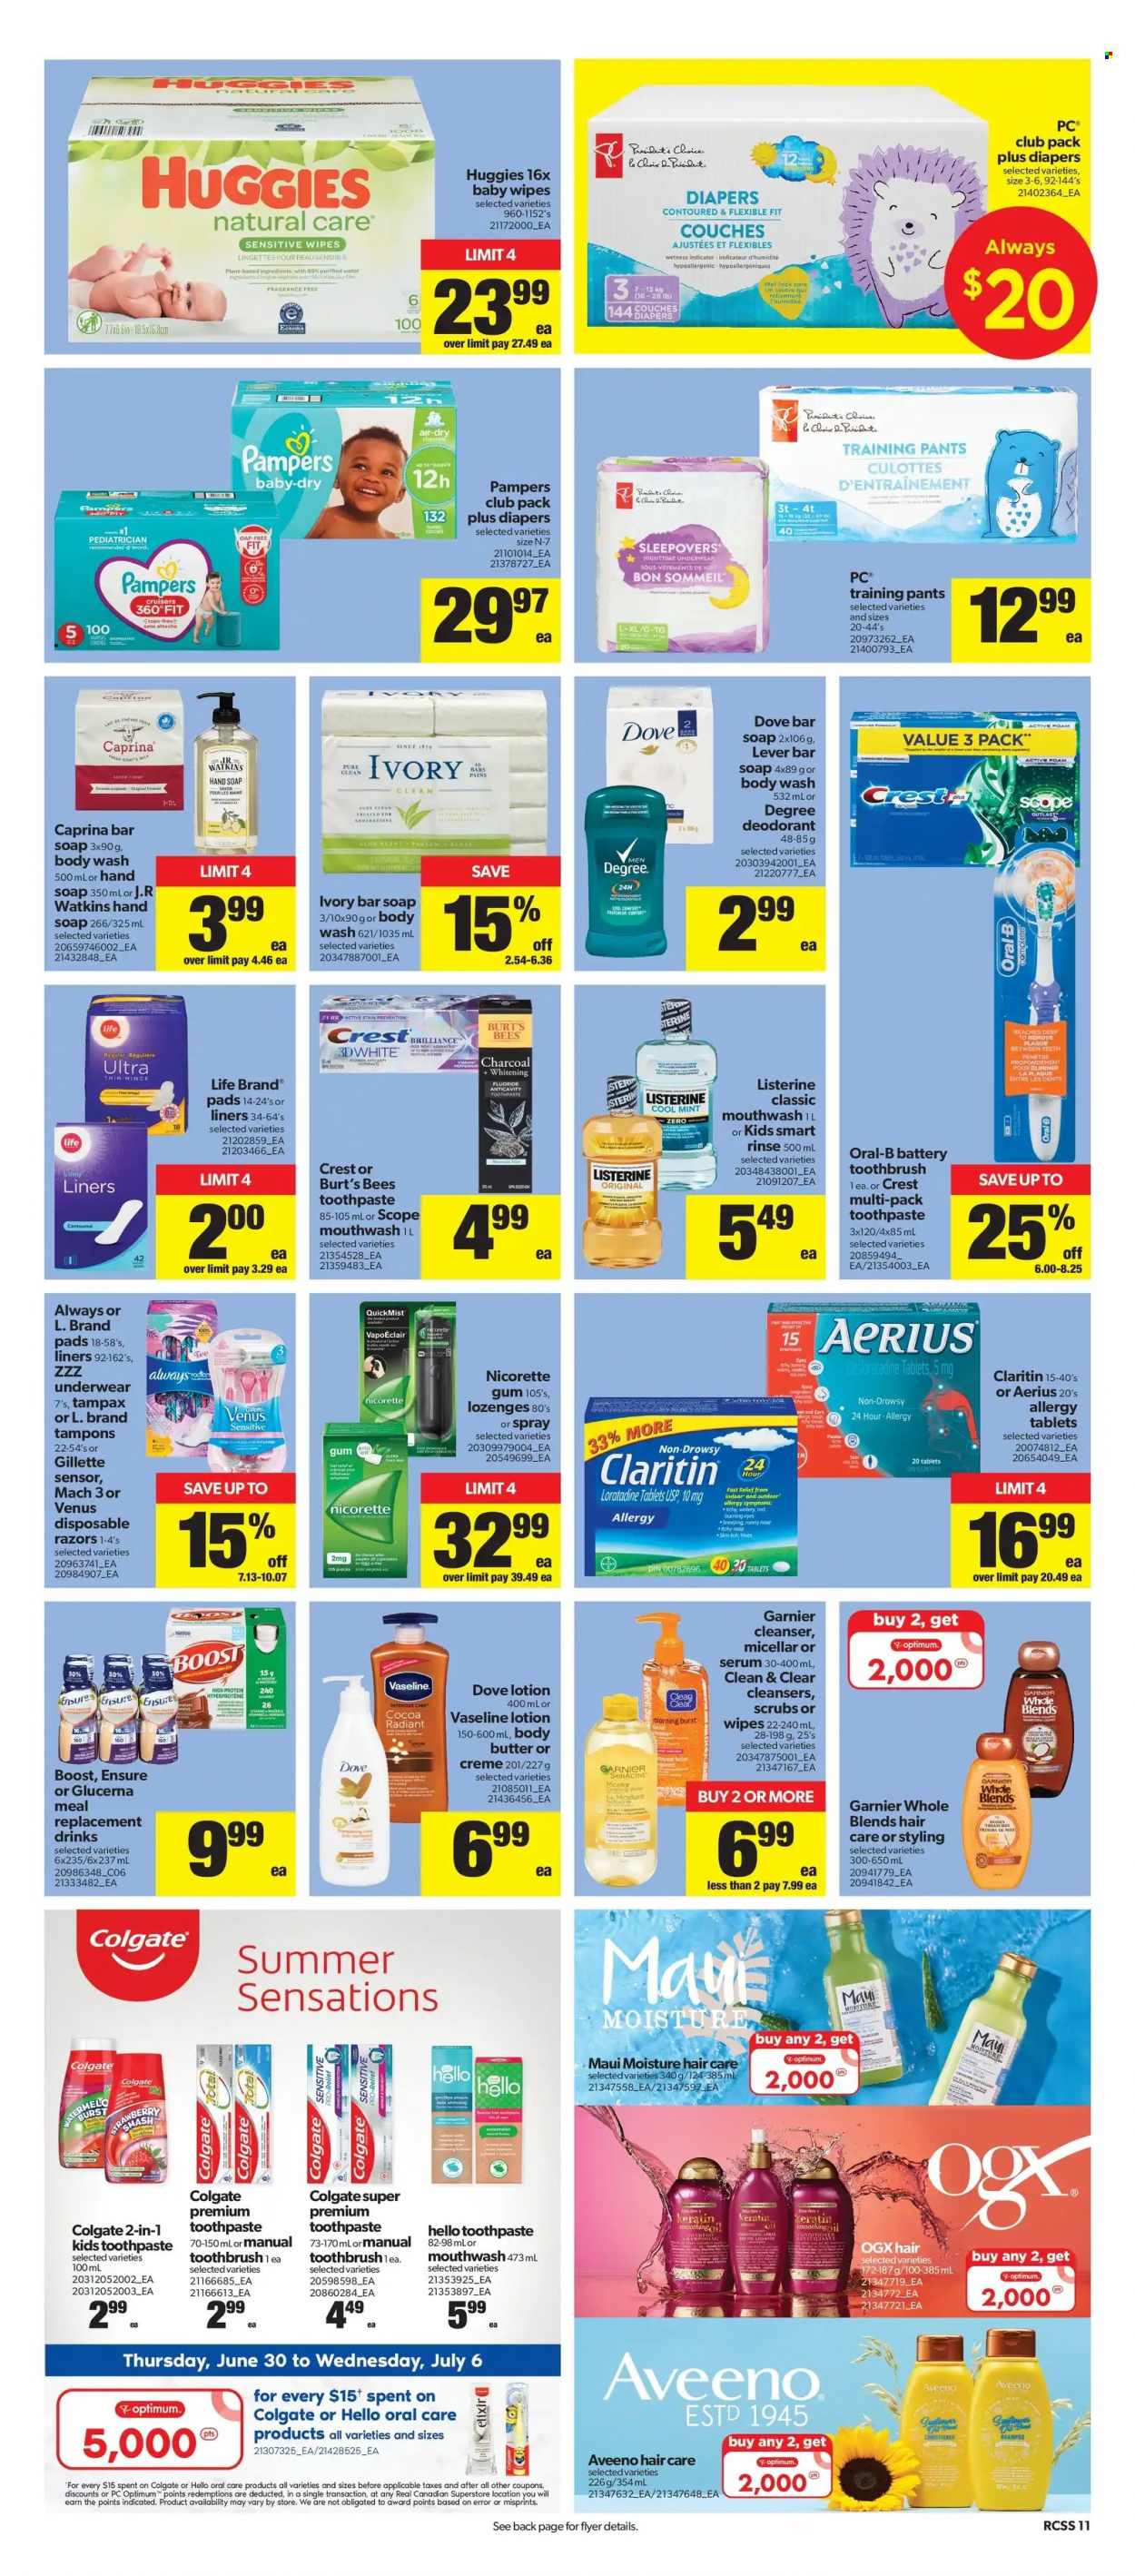 thumbnail - Real Canadian Superstore Flyer - June 30, 2022 - July 06, 2022 - Sales products - watermelon, Président, purified water, Boost, gin, wipes, pants, baby wipes, nappies, baby pants, Aveeno, body wash, hand soap, Vaseline, soap bar, soap, toothbrush, toothpaste, mouthwash, Crest, tampons, cleanser, Gillette, serum, Clean & Clear, OGX, keratin, Maui Moisture, body butter, body lotion, anti-perspirant, Venus, disposable razor, Optimum, Nicorette, Glucerna, Nicorette Gum, Dove, Colgate, Garnier, Listerine, shampoo, Tampax, Huggies, Pampers, Oral-B, deodorant. Page 14.